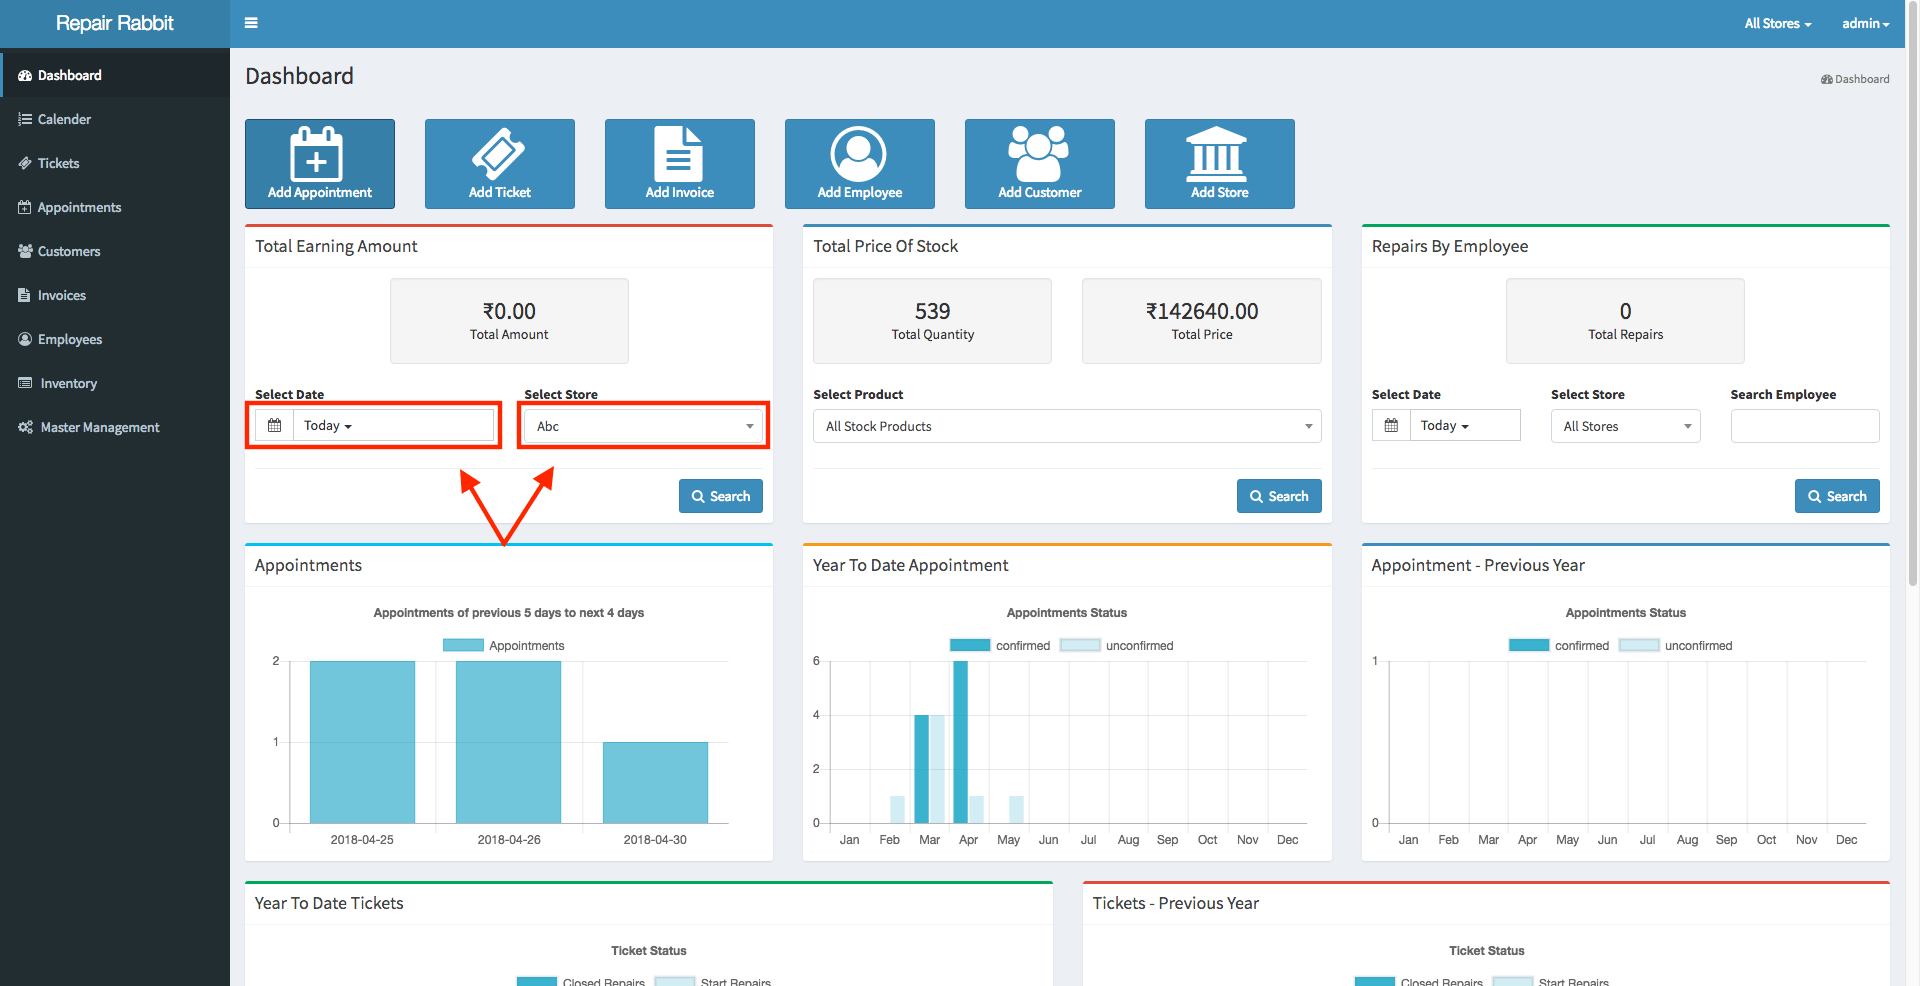 How to check revenue generated from the dashboard?